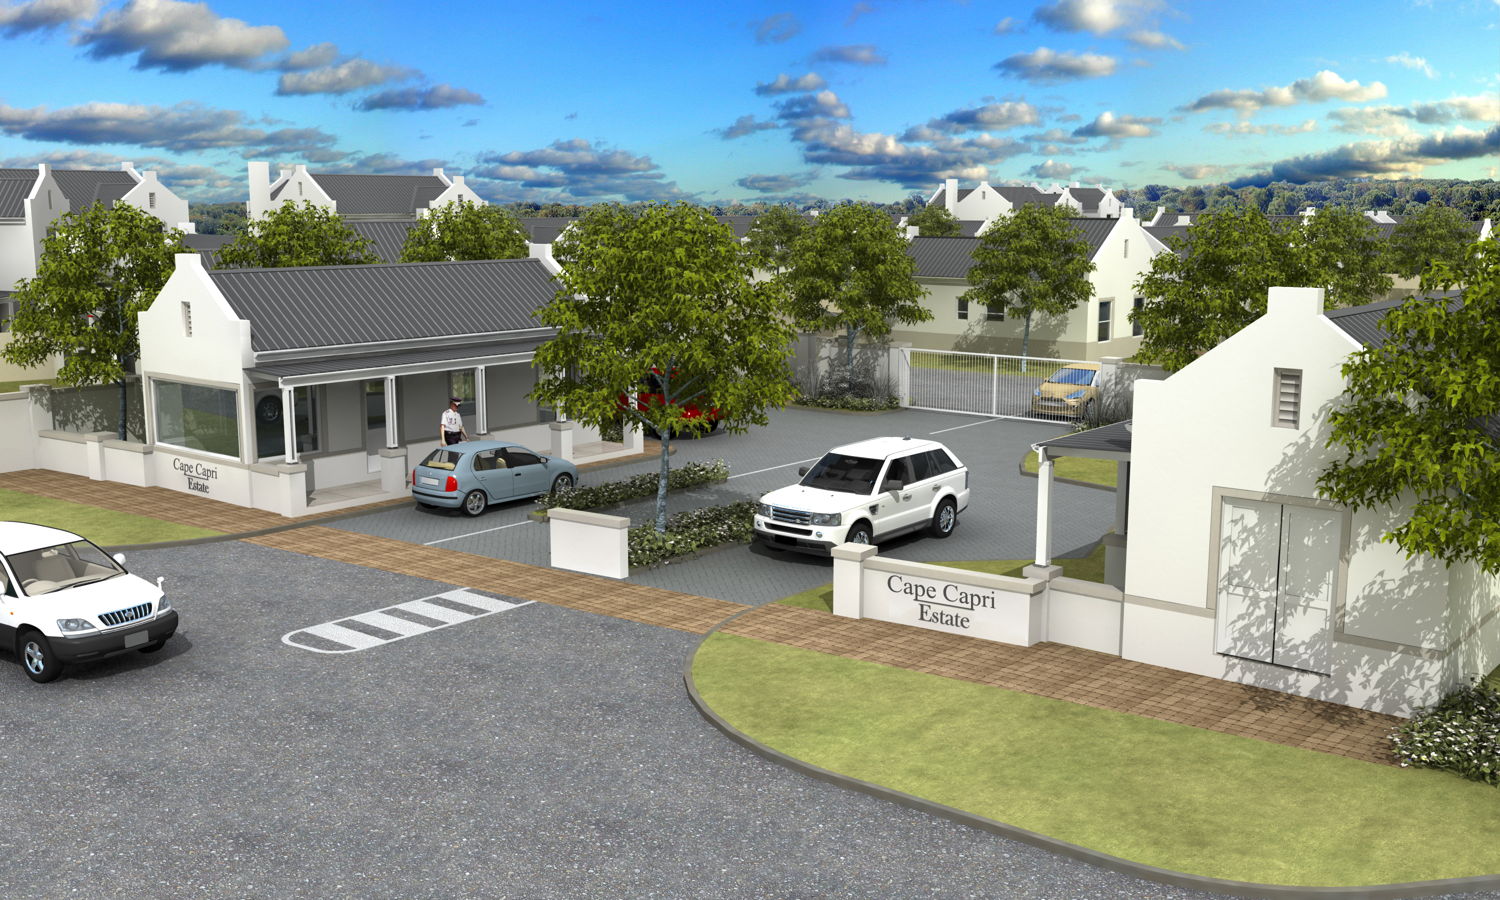 A new security estate is planned for Capri. Two and three-bedroom Cape vernacular style homes within an indigenous landscaped environment are on offer. Turn key  properties priced from: R1.795 million to R2.519 million VAT inclusive. 10 percent deposit upfront. 